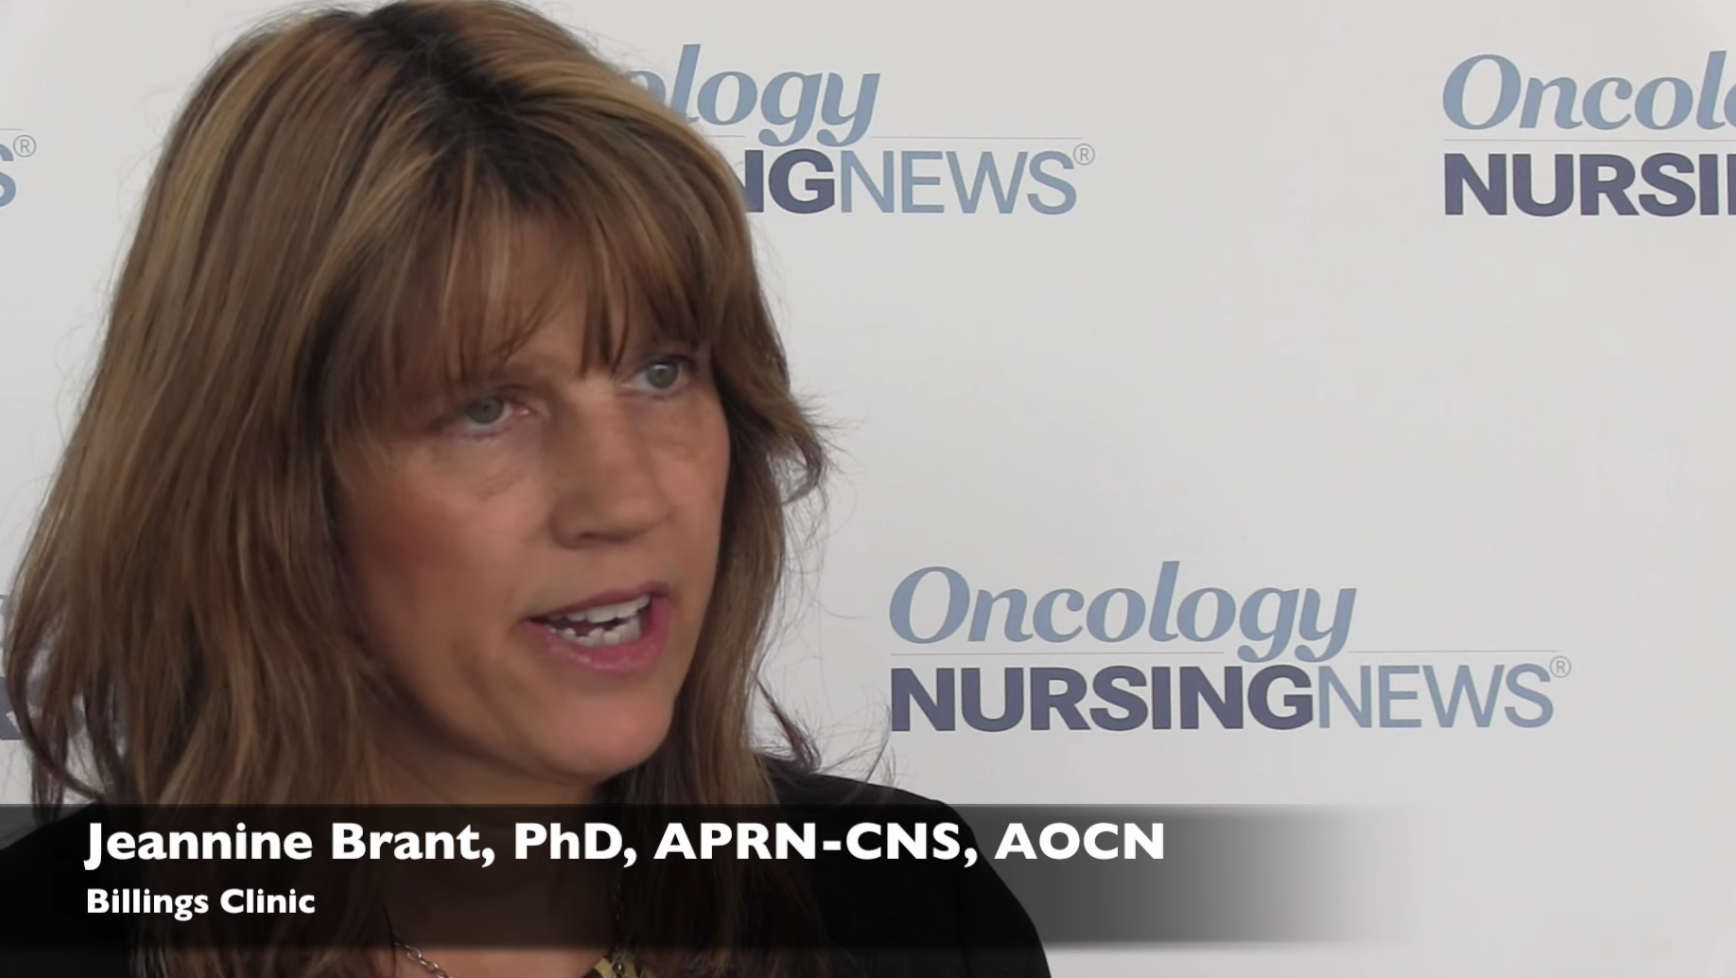 Jeannine Brant, PhD, Billings Clinic, discusses the benefits of patient-reported outcomes in cancer care.